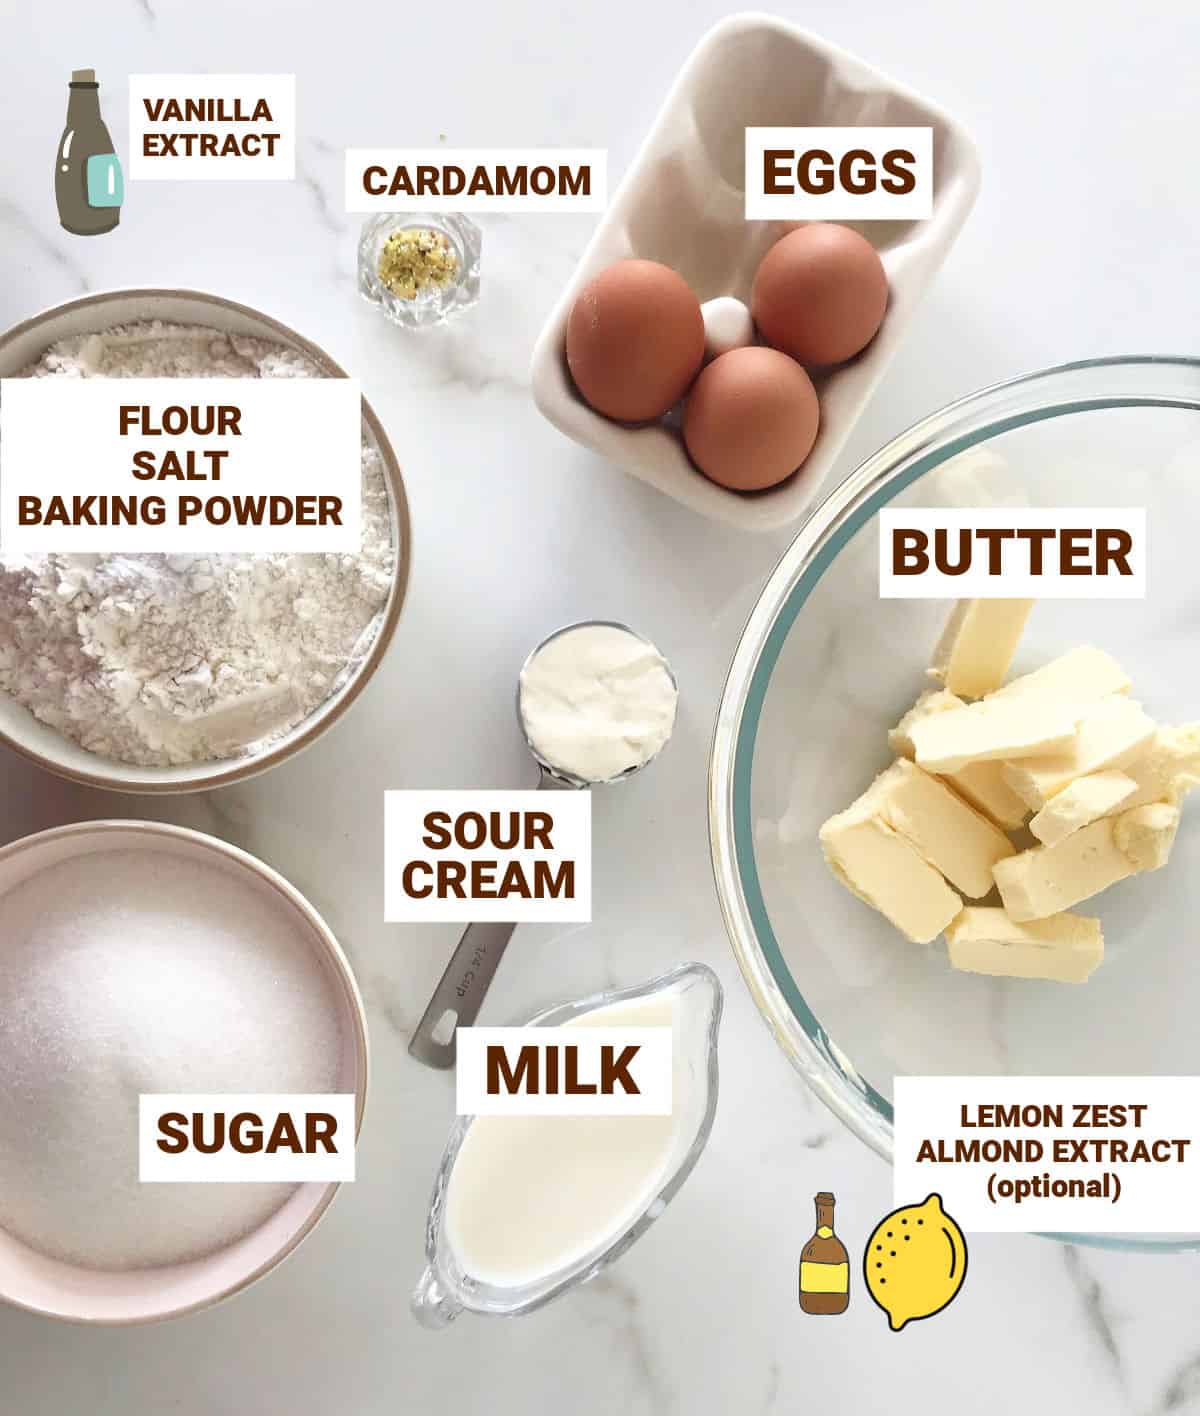 Cardamom cake ingredients in bowls on white surface including eggs, sugar, sour cream, milk, butter, flour